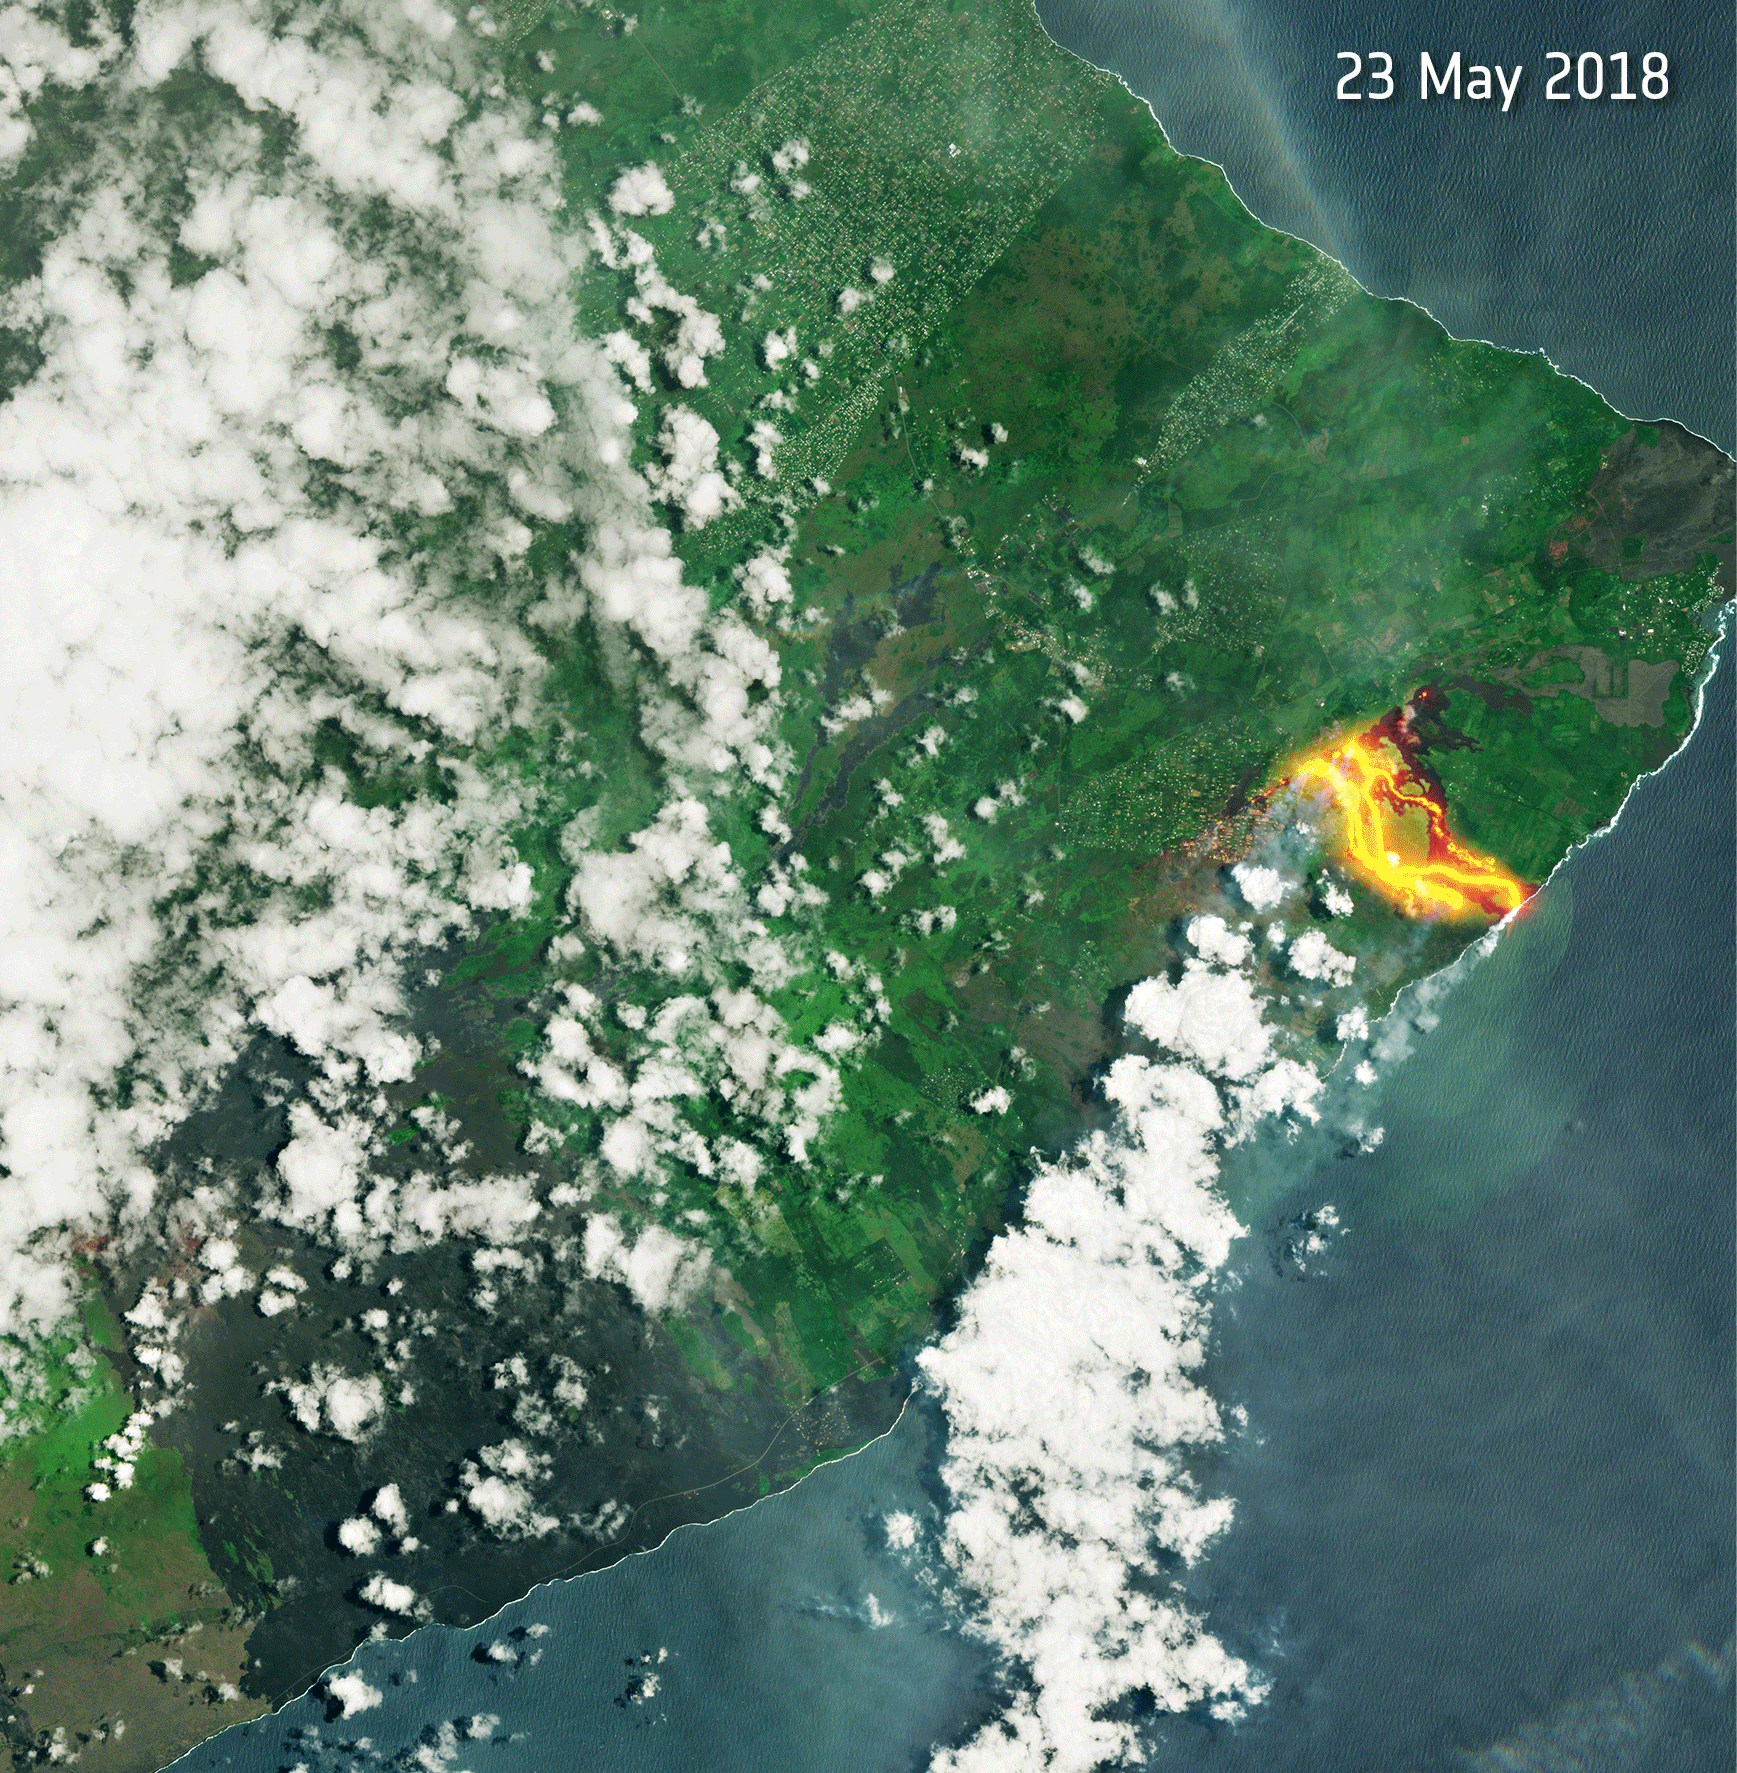 Figure 22: Restless Kilauea. Fiery lava continues to pour from the Kilauea volcano on Hawaii’s Big Island. These Copernicus Sentinel-2 images from 23 May, 7 June and 12 June 2018 show the relentless flow of lava and clouds of ash. This is an update of the Hawaii lava flow animation published on 8 June. The eruption, which began in early May, has destroyed more than 600 homes, spread lava over more than 800 ha of land and opened up at least 22 fissures in the ground, according to Hawaii County Mayor Harry Kim. Although this eruption has produced slow-moving lava, which has allowed people to evacuate, it is reported to be the most destructive eruption in the U.S. since that of Mount St. Helen’s in May 1980 (image credit: ESA, the image contains modified Copernicus Sentinel data (2018), processed by ESA, CC BY-SA 3.0 IGO)